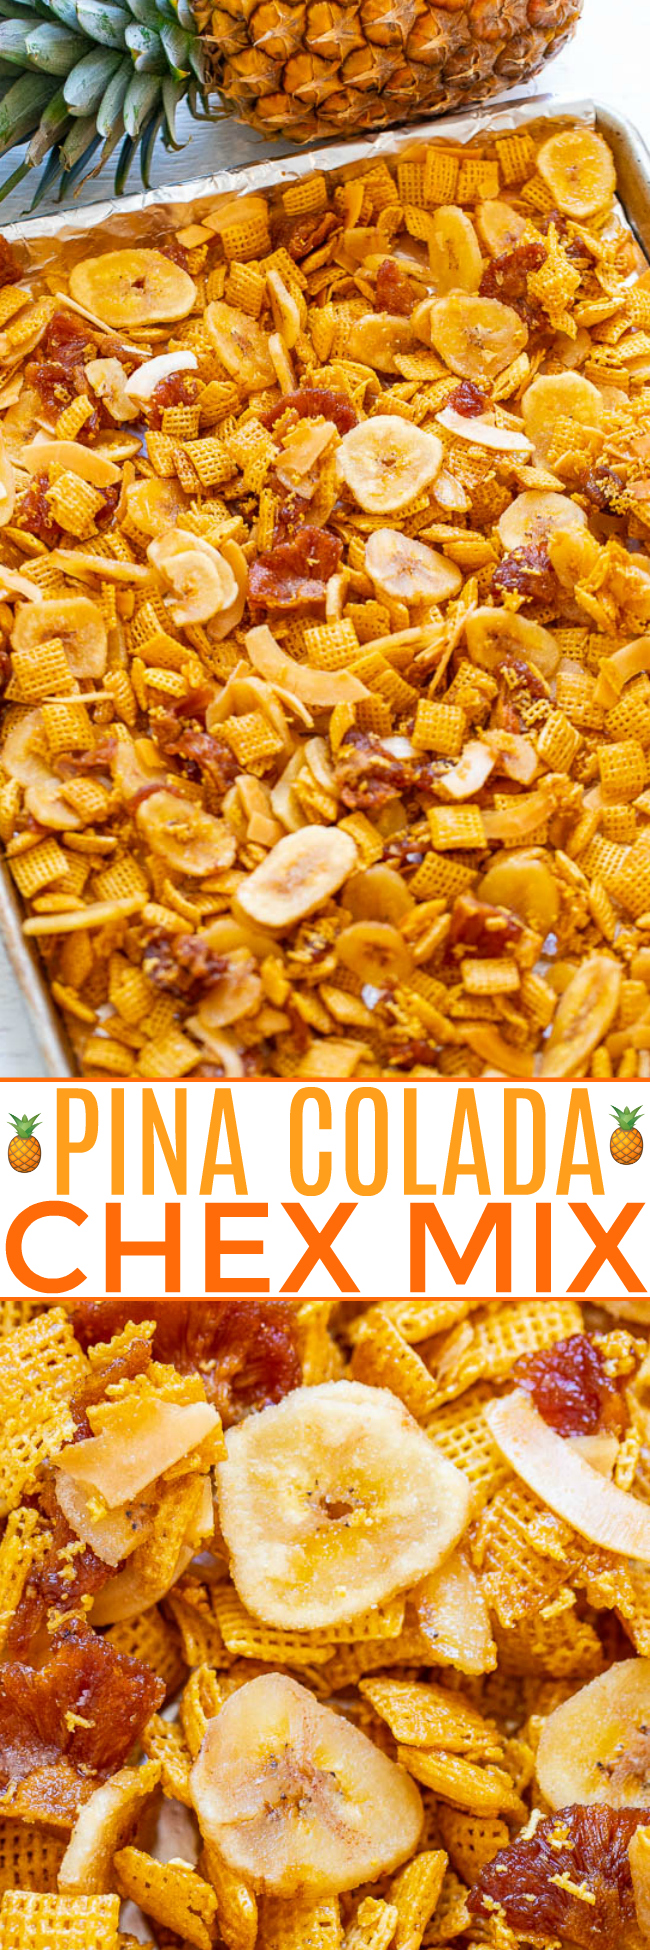 Piña Colada Chex Mix — An EASY and addictively AMAZING salty-sweet Chex mix!! It's crunchy, chewy, and between the pineapple, coconut, banana, and lime you'll feel like you're on a tropical vacation!!